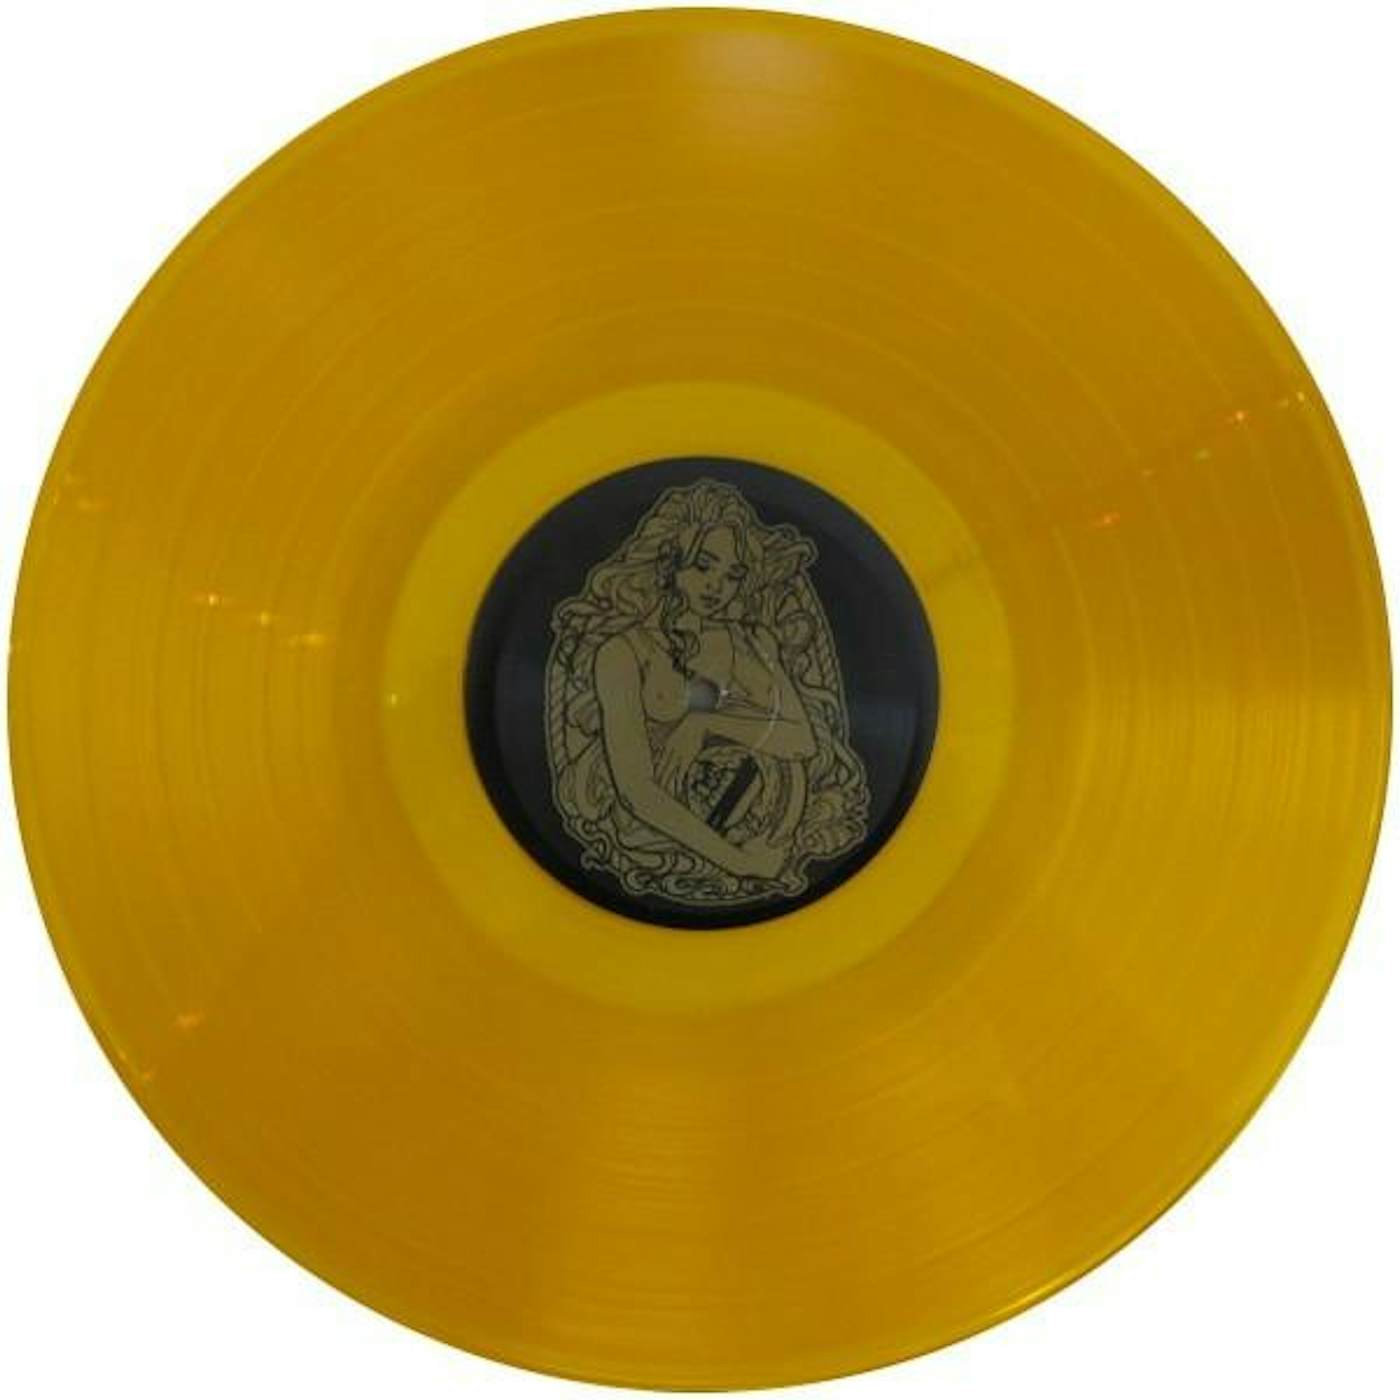 Cancer Bats 'Birthing The Giant' Vinyl Record